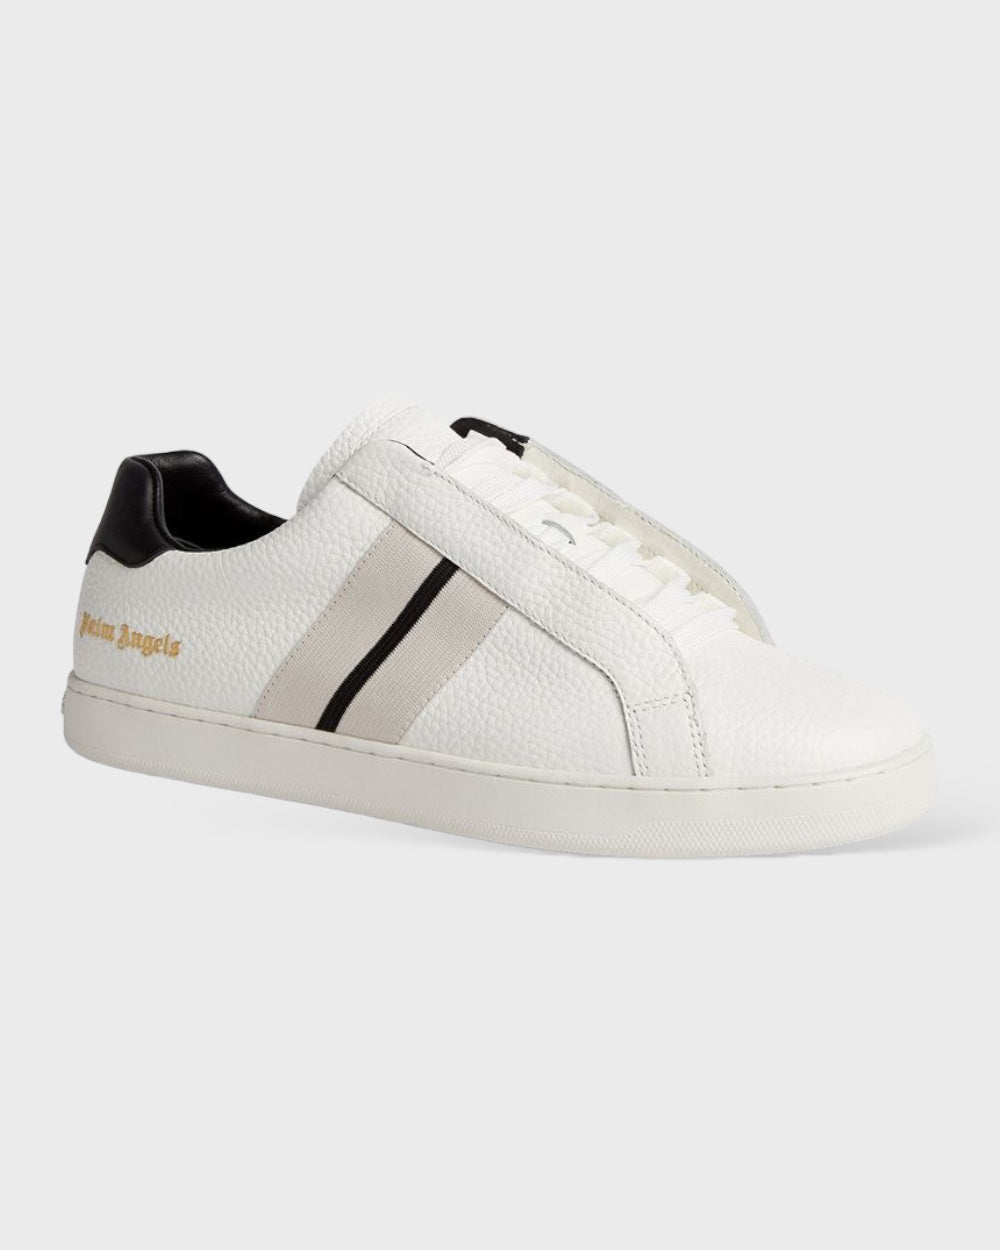 Palm Angels White Leather Sneaker